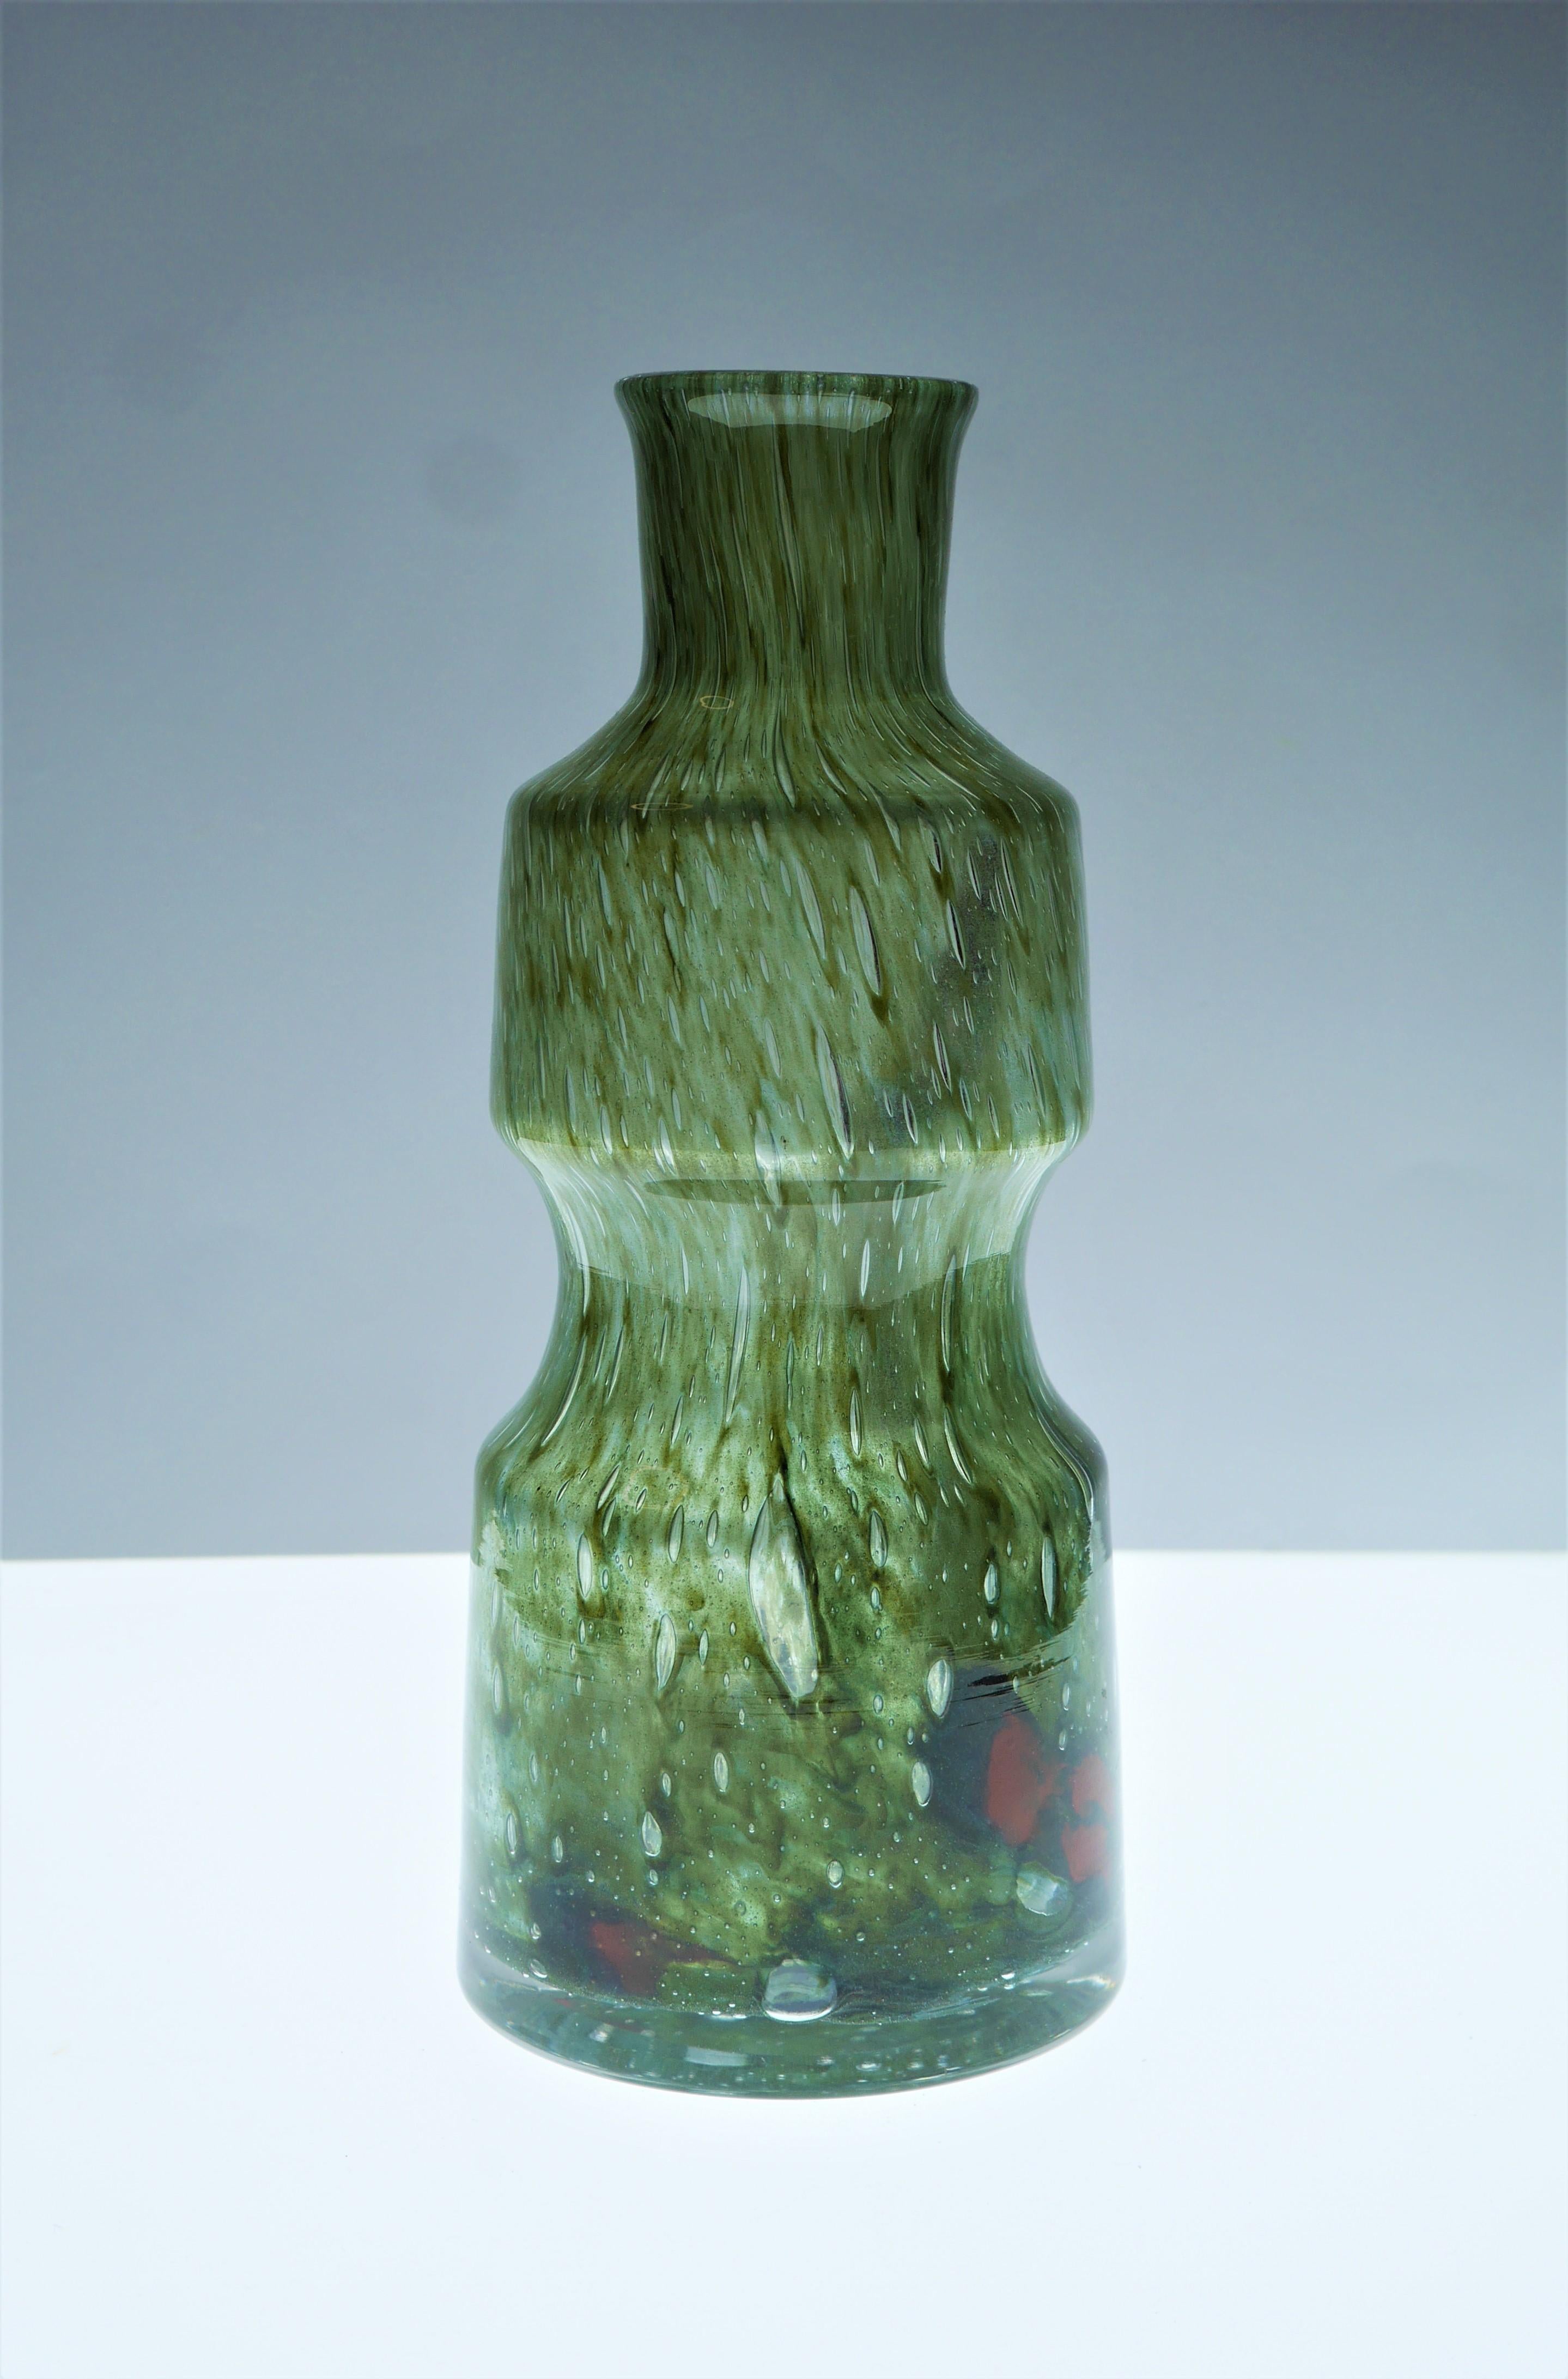 Hand-Crafted Green Glass Art Vase from Prachen Glass Works